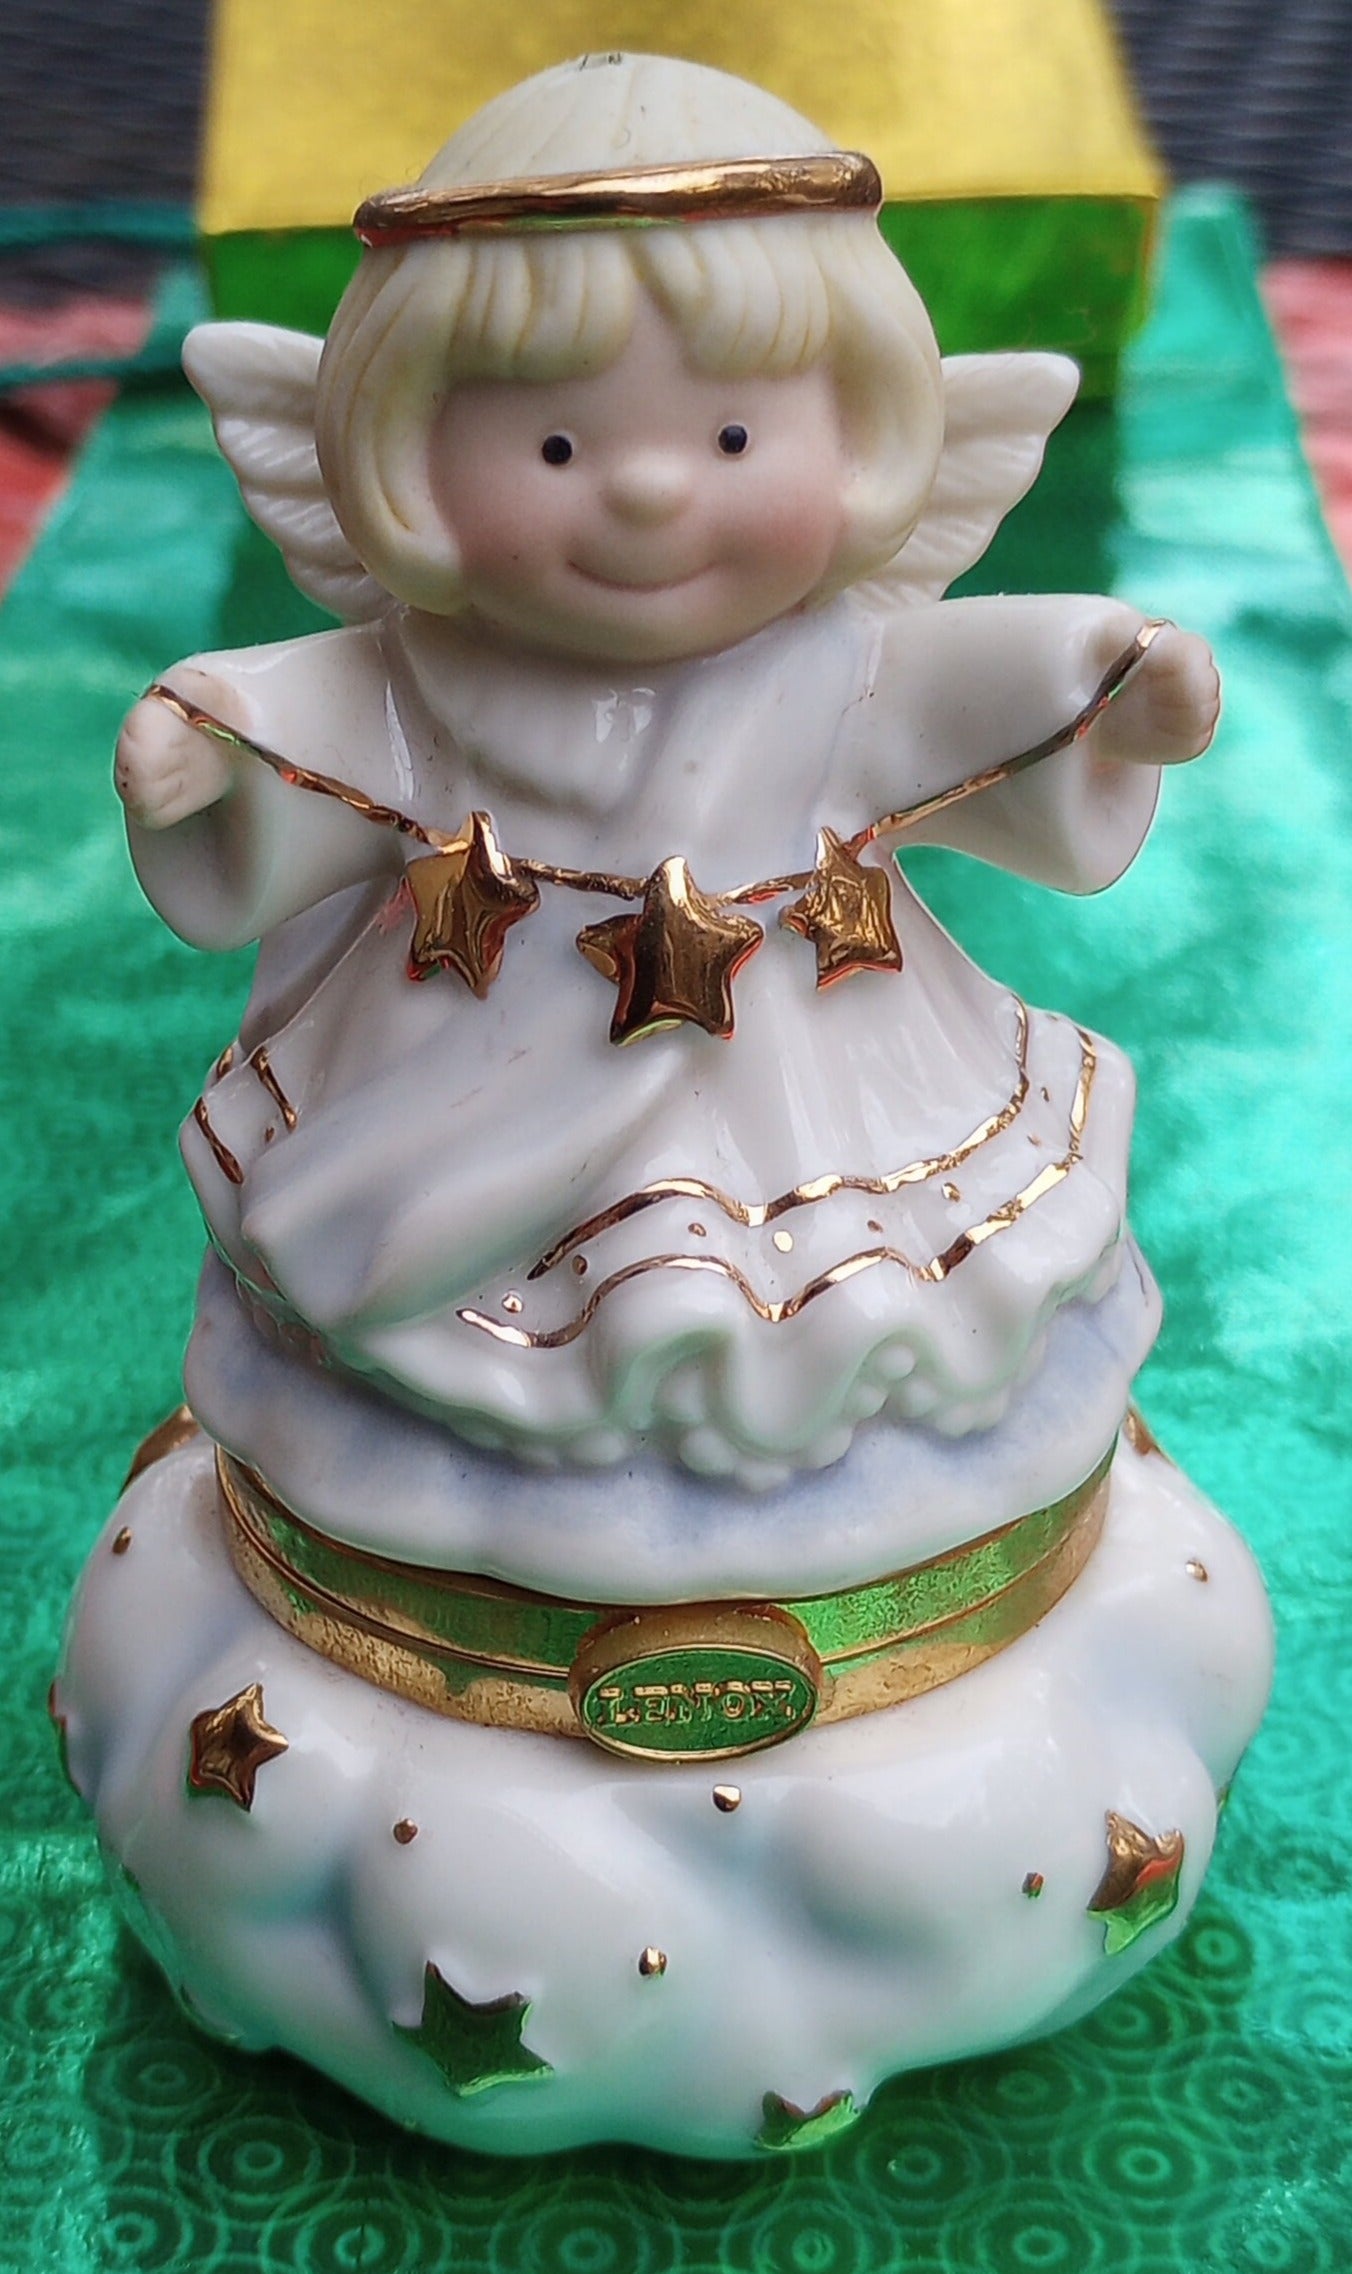 Lenox Christmas Angel figurine, ornament. Cherub faced angel gift made from china holding stars. The bottom opens and has a trinket holder in the base.